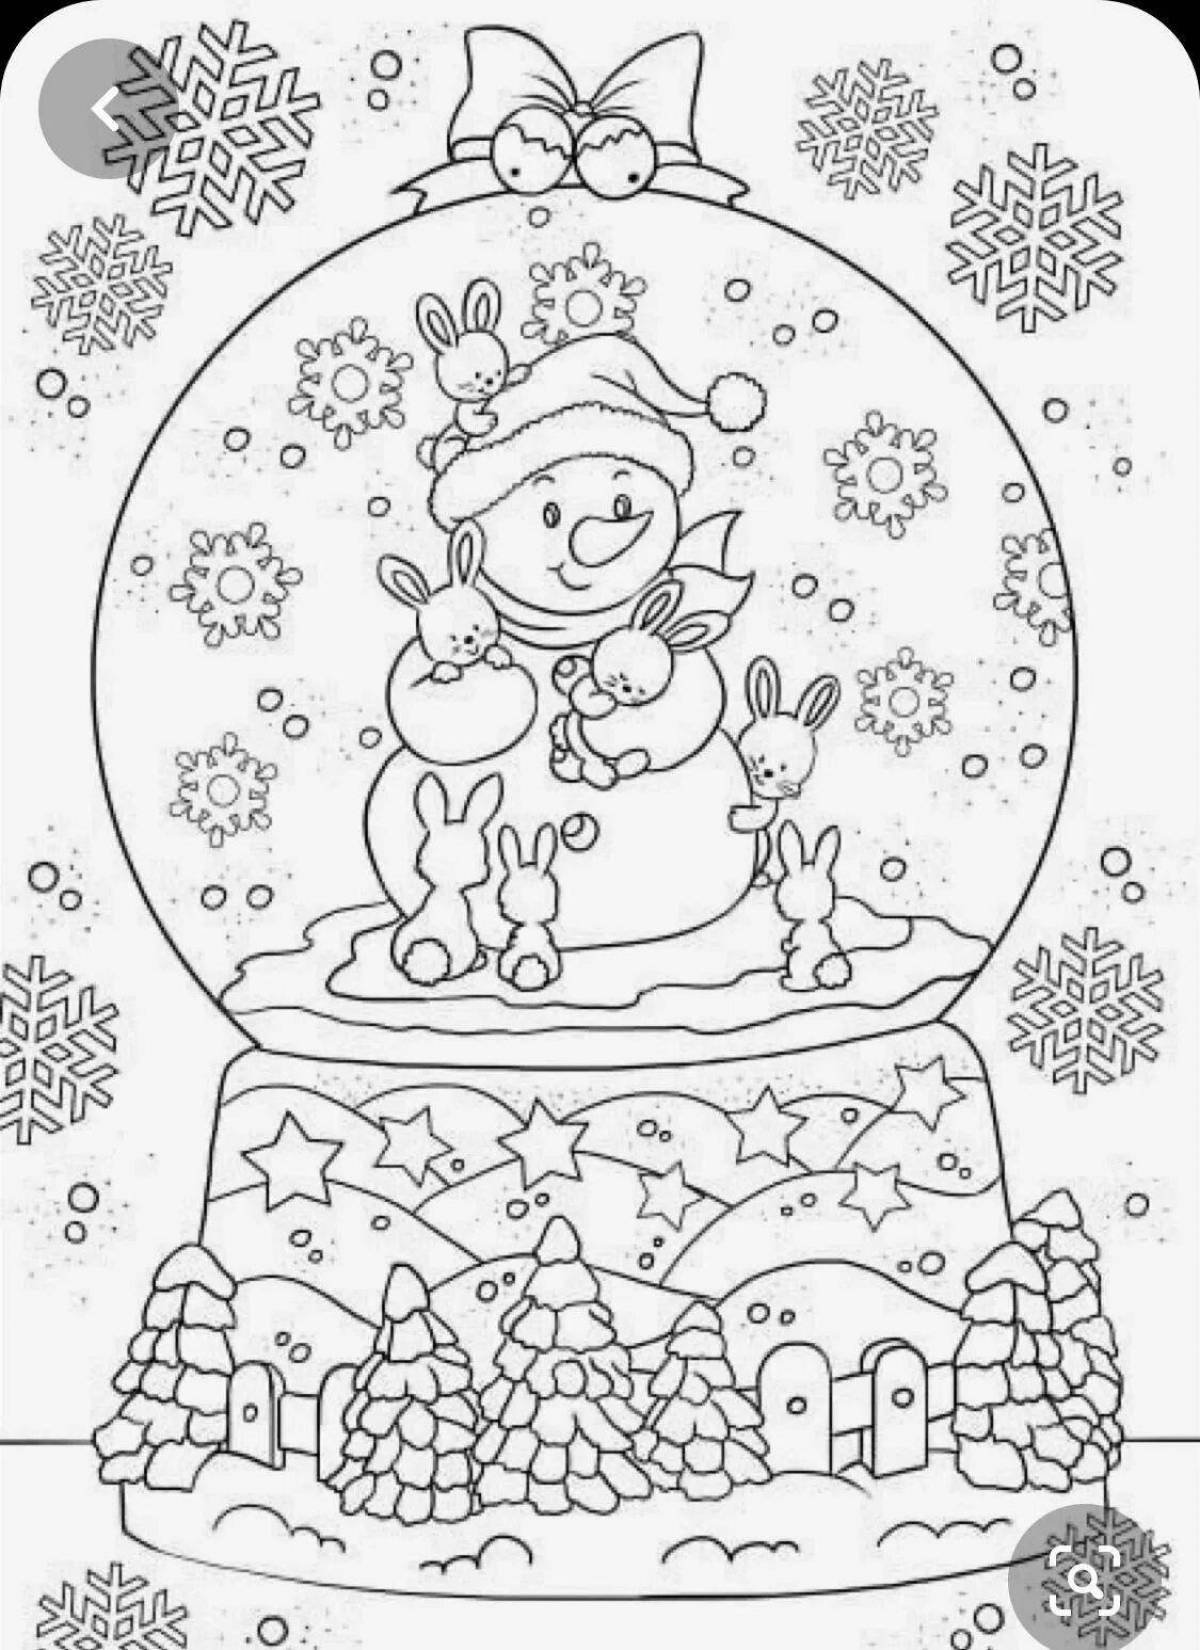 Great winter coloring card